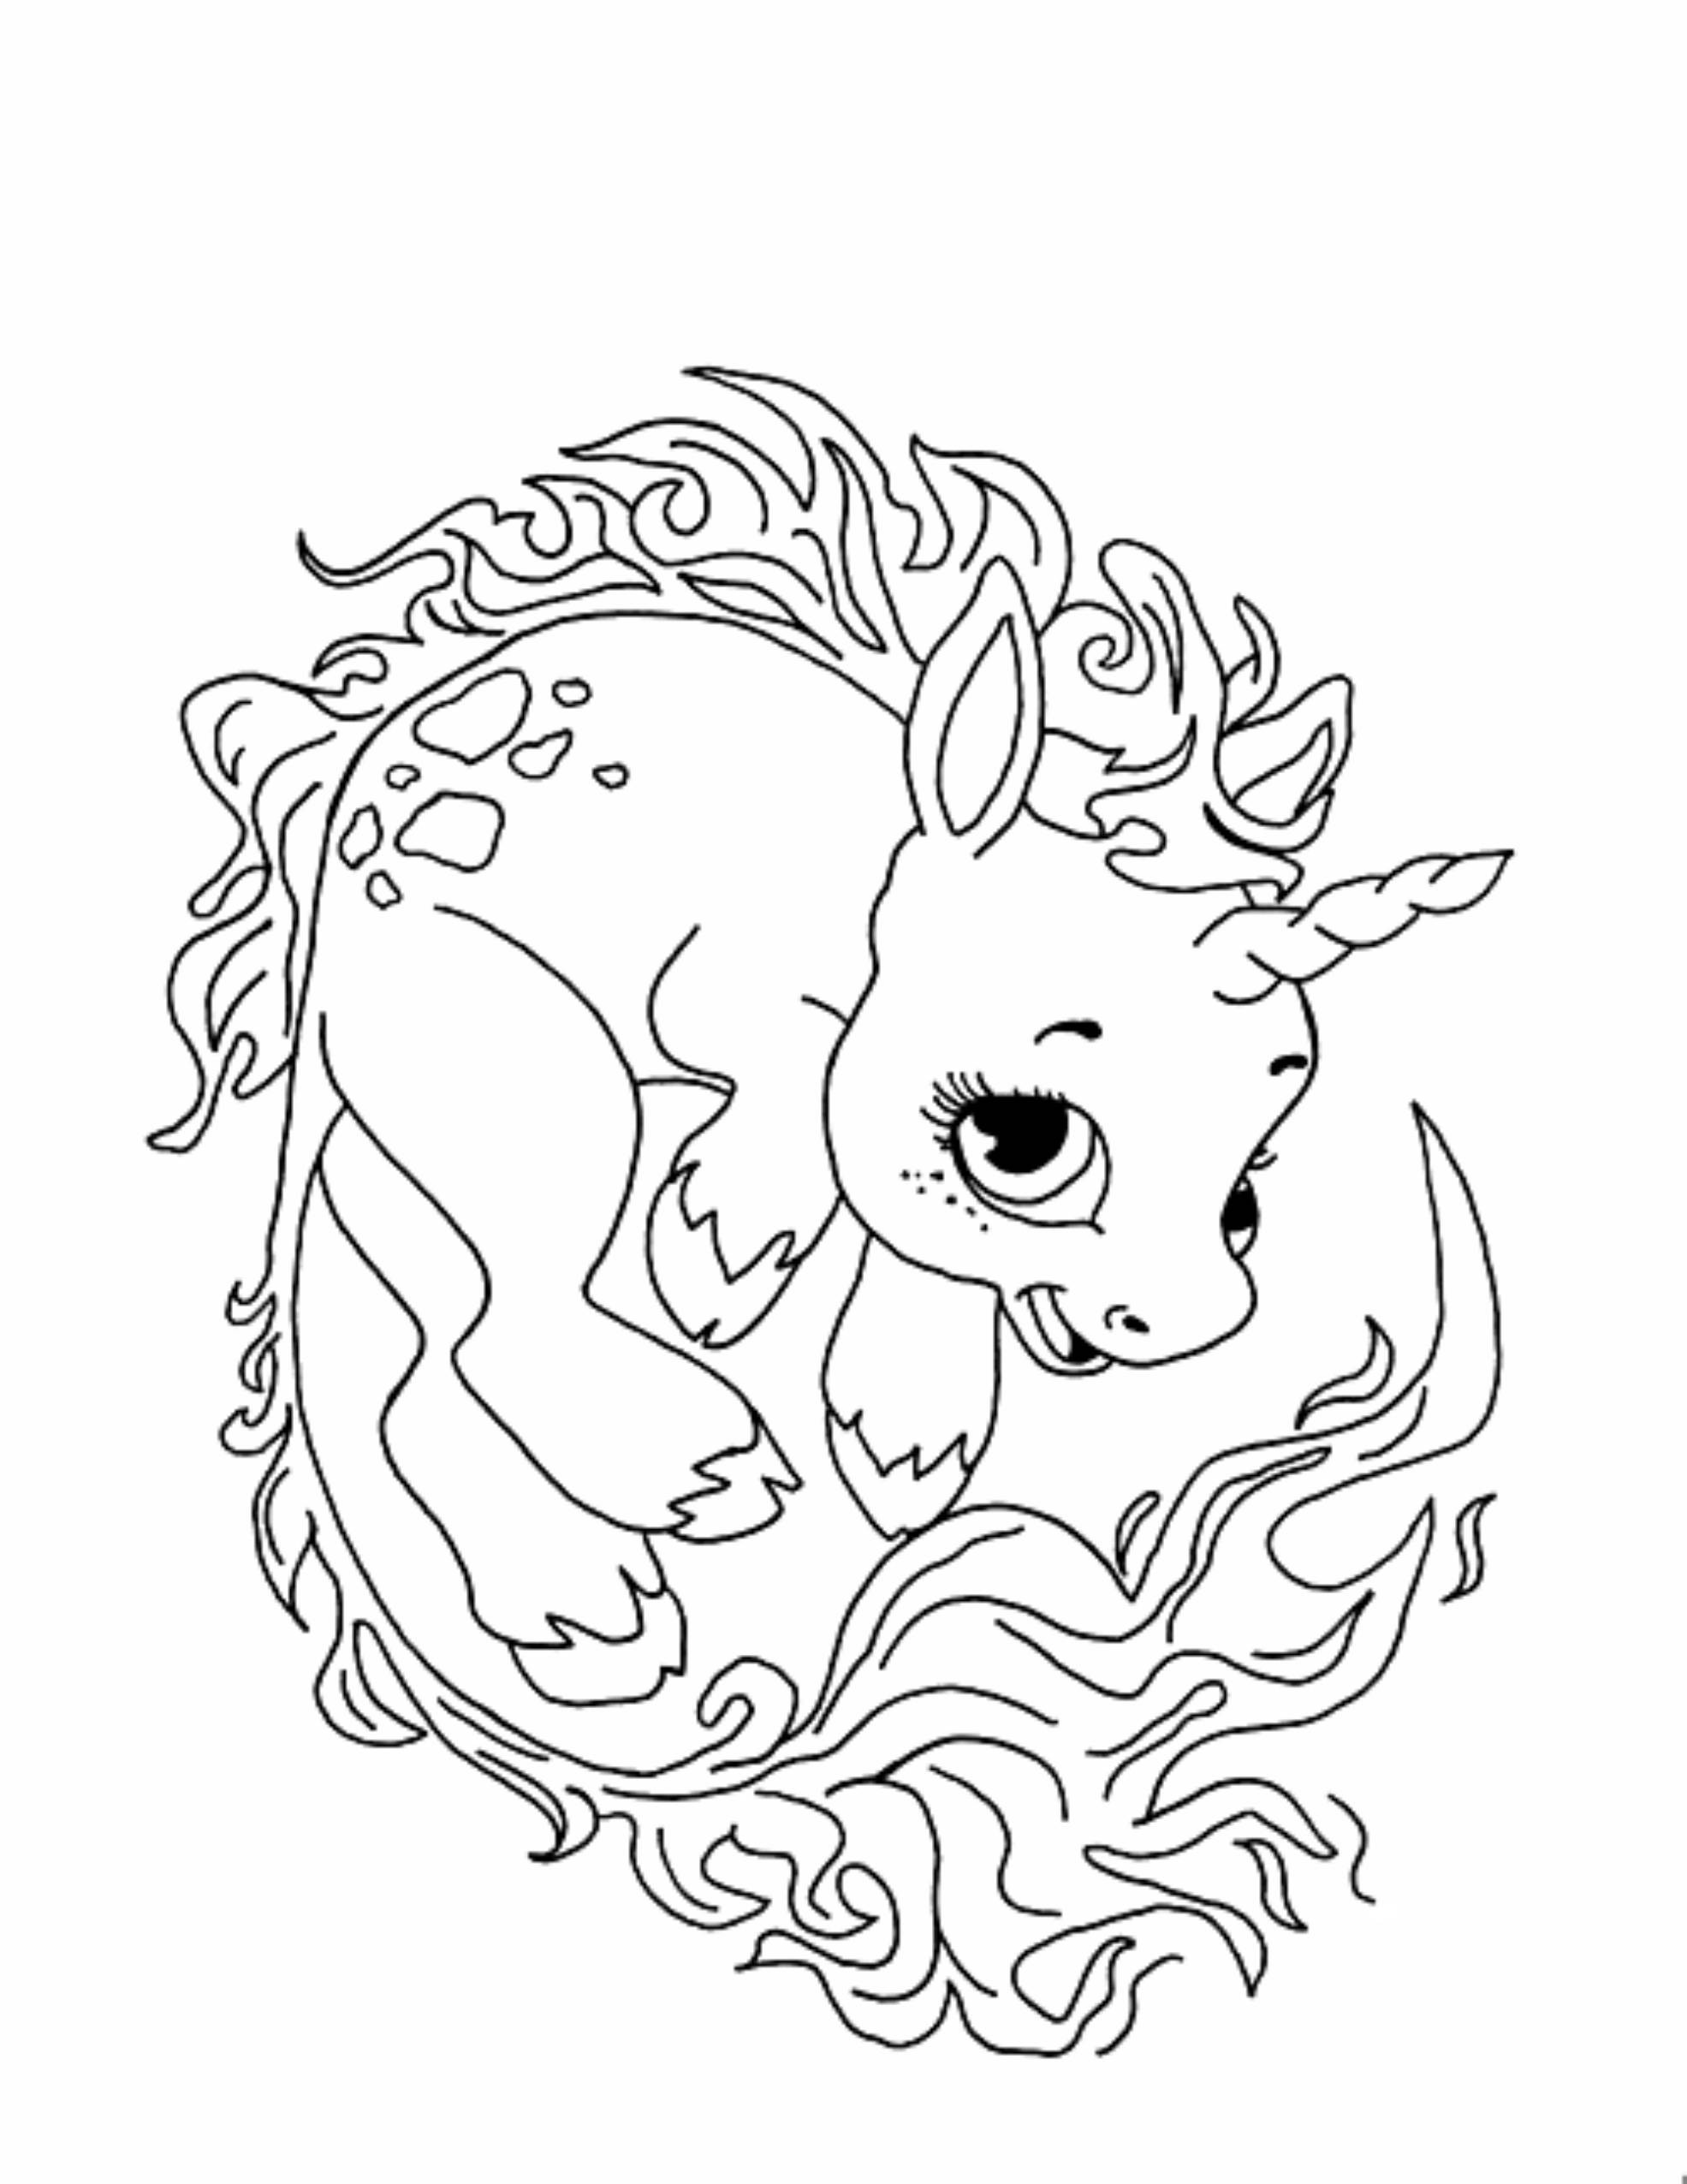 Cute Unicorn Coloring Pages For Kids
 Print & Download Unicorn Coloring Pages for Children